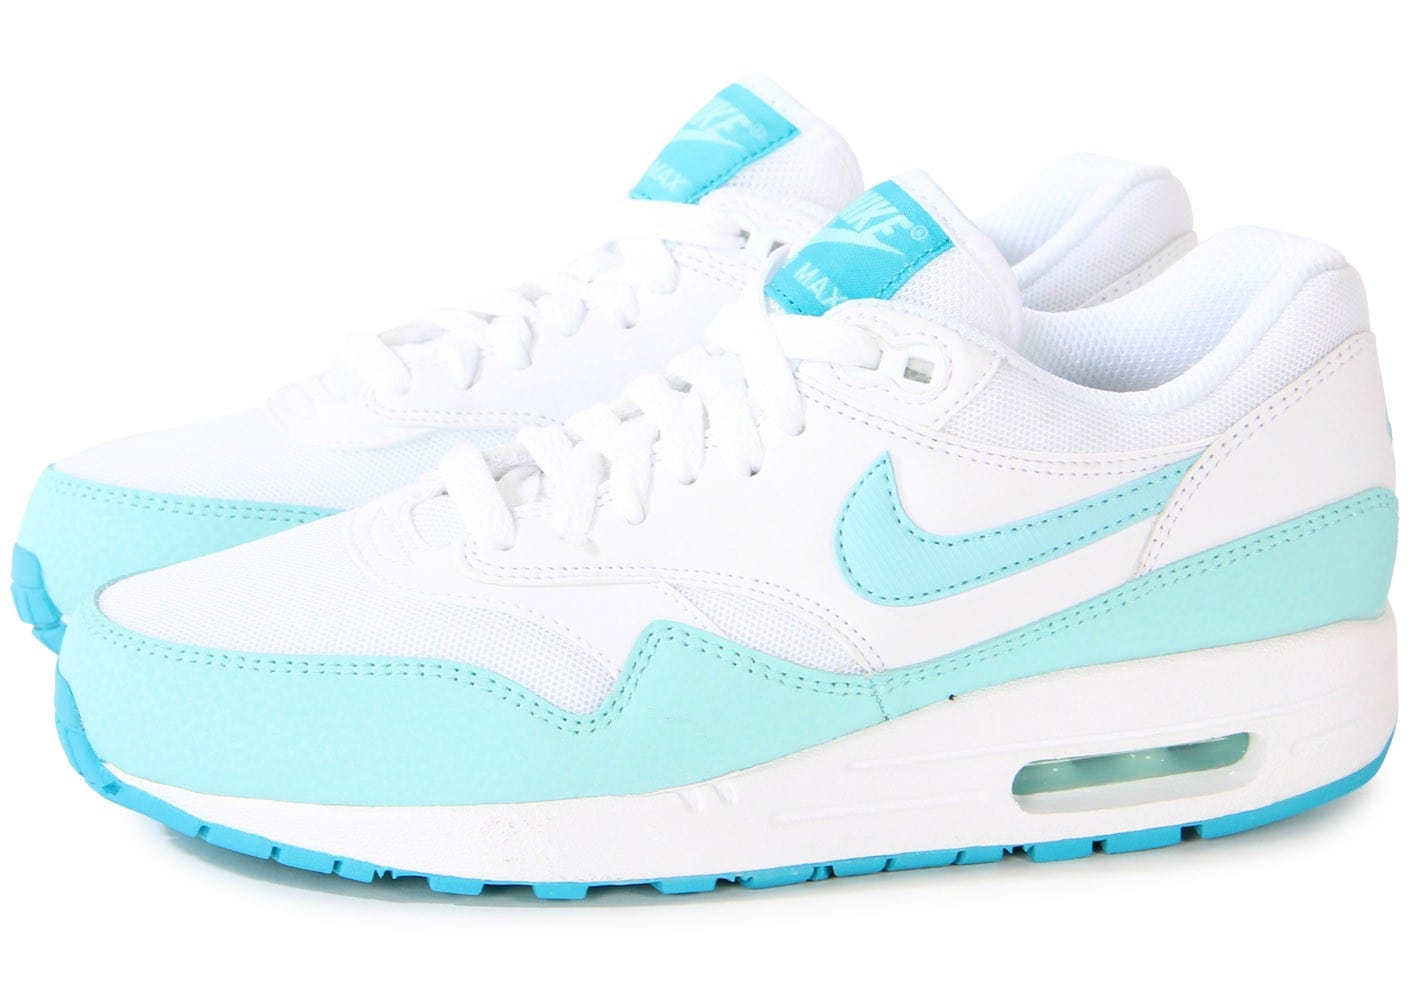 nike air max 1 essential blanche turquoise, Cliquez pour zoomer Chaussures Nike Air Max 1 Essential Blanche Turquoise vue extérieure ...